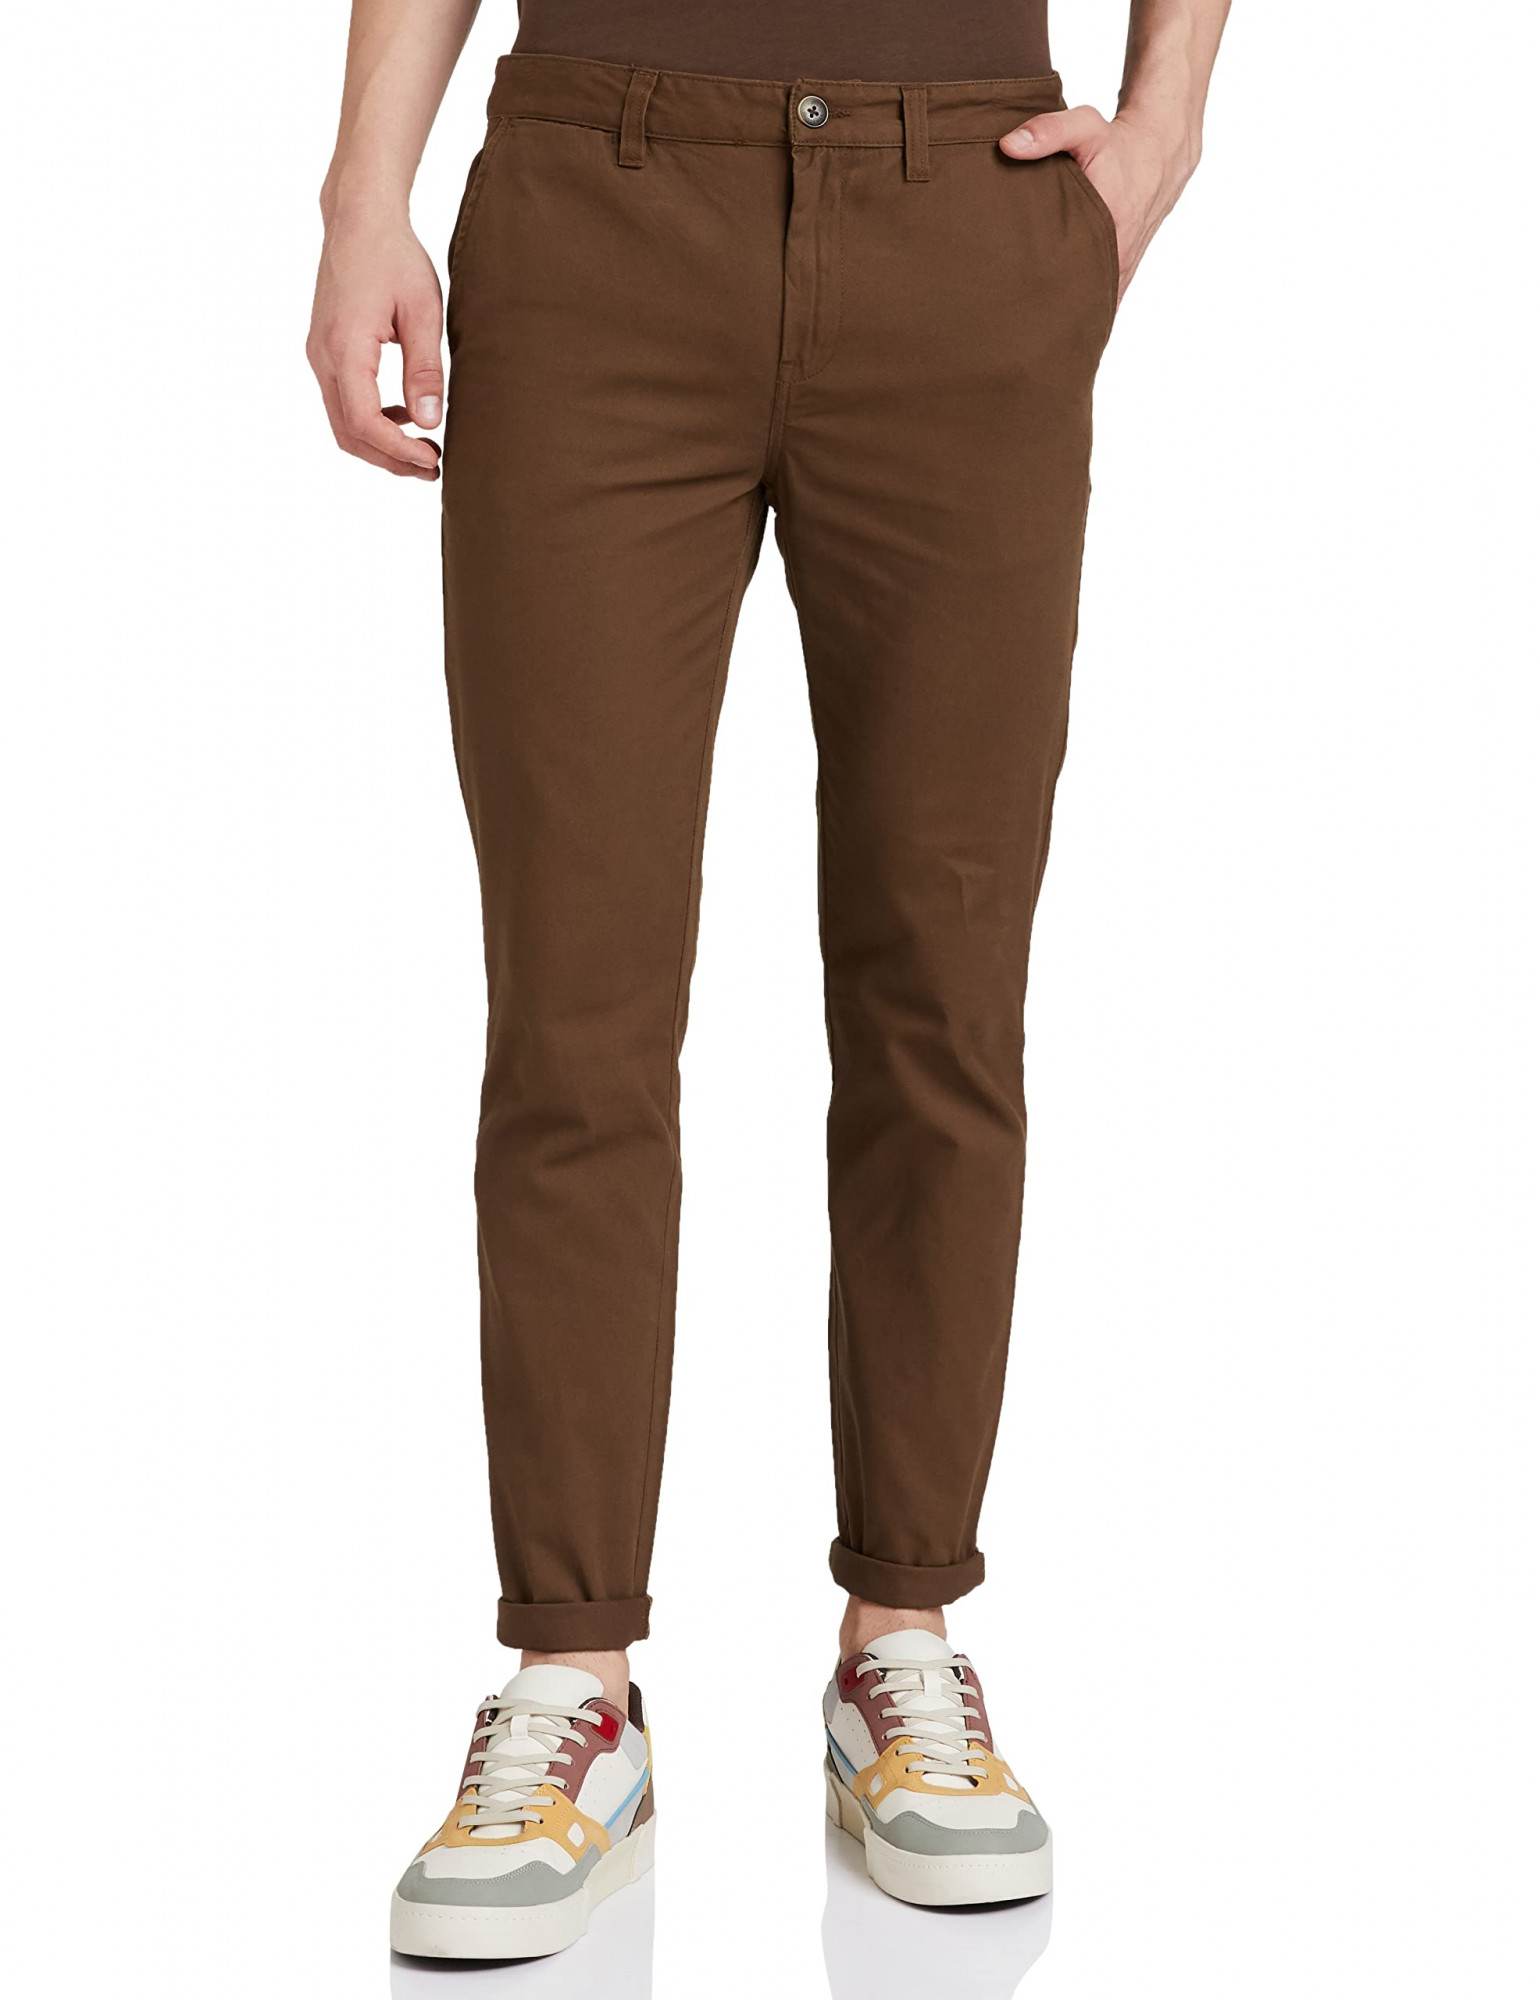 Cotton,Linen Flat Trousers,Pleated Trousers,Cargos,Chinos Branded Cotton  Trousers at Rs 265/piece in Ahmedabad